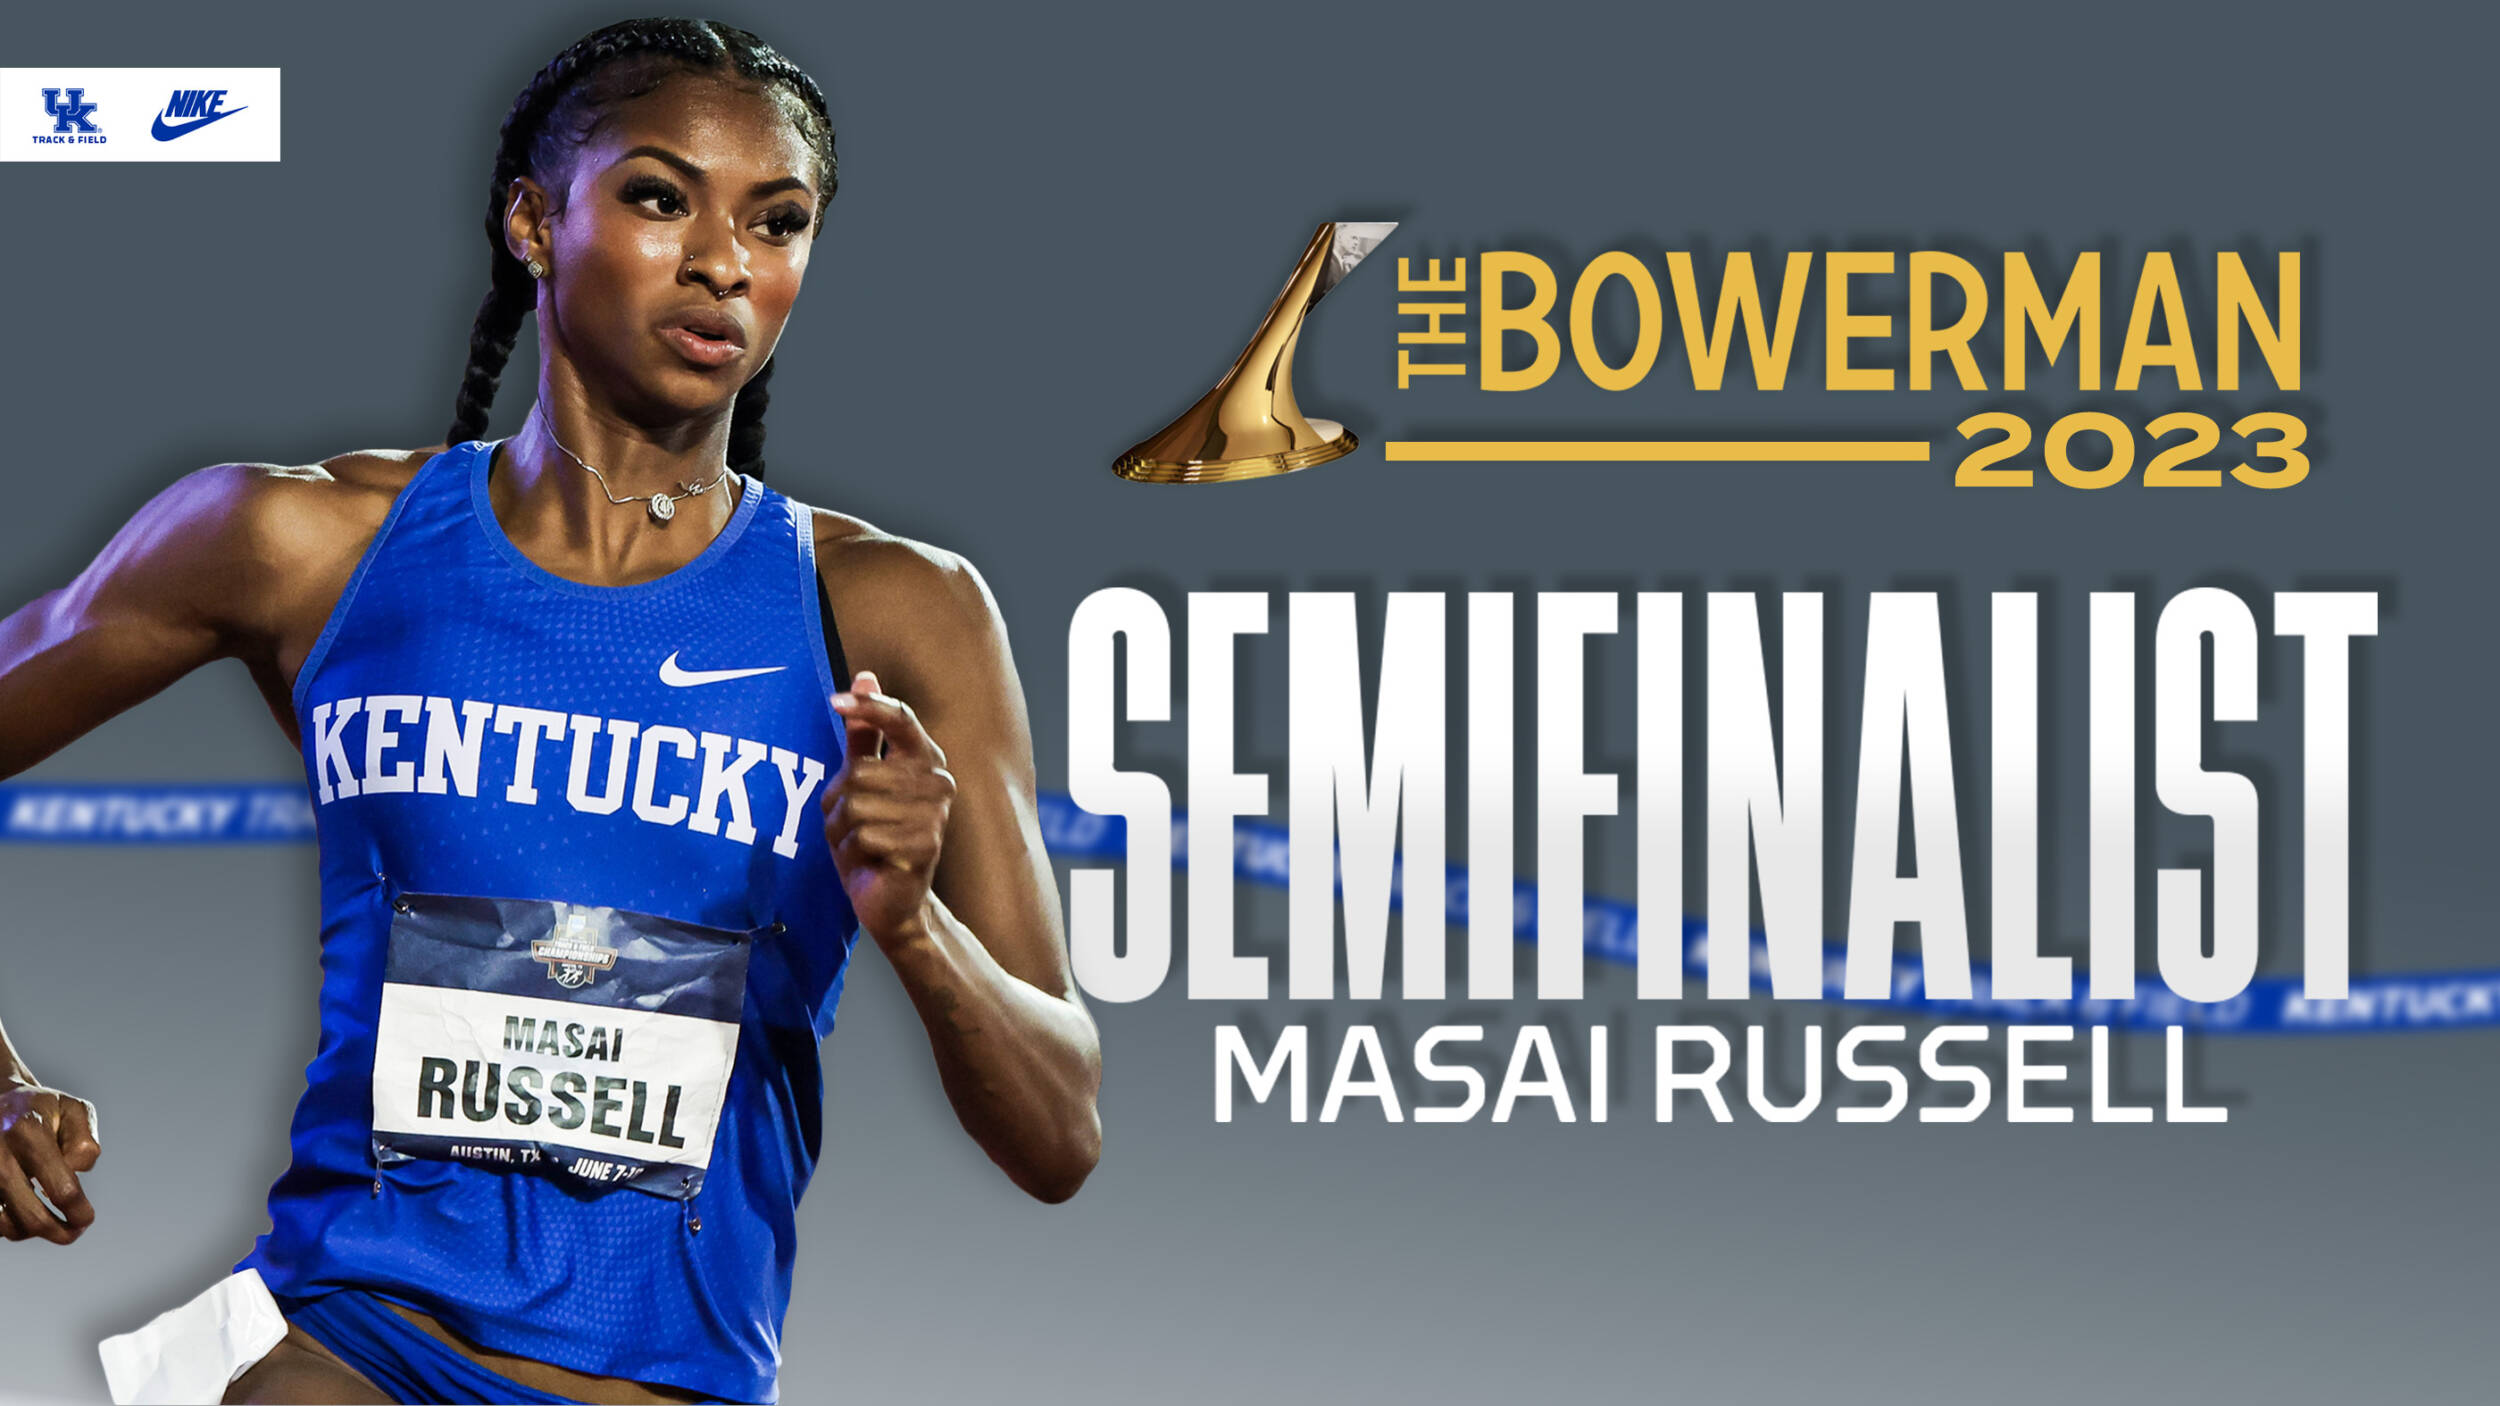 Masai Russell Named Semifinalist For The Bowerman